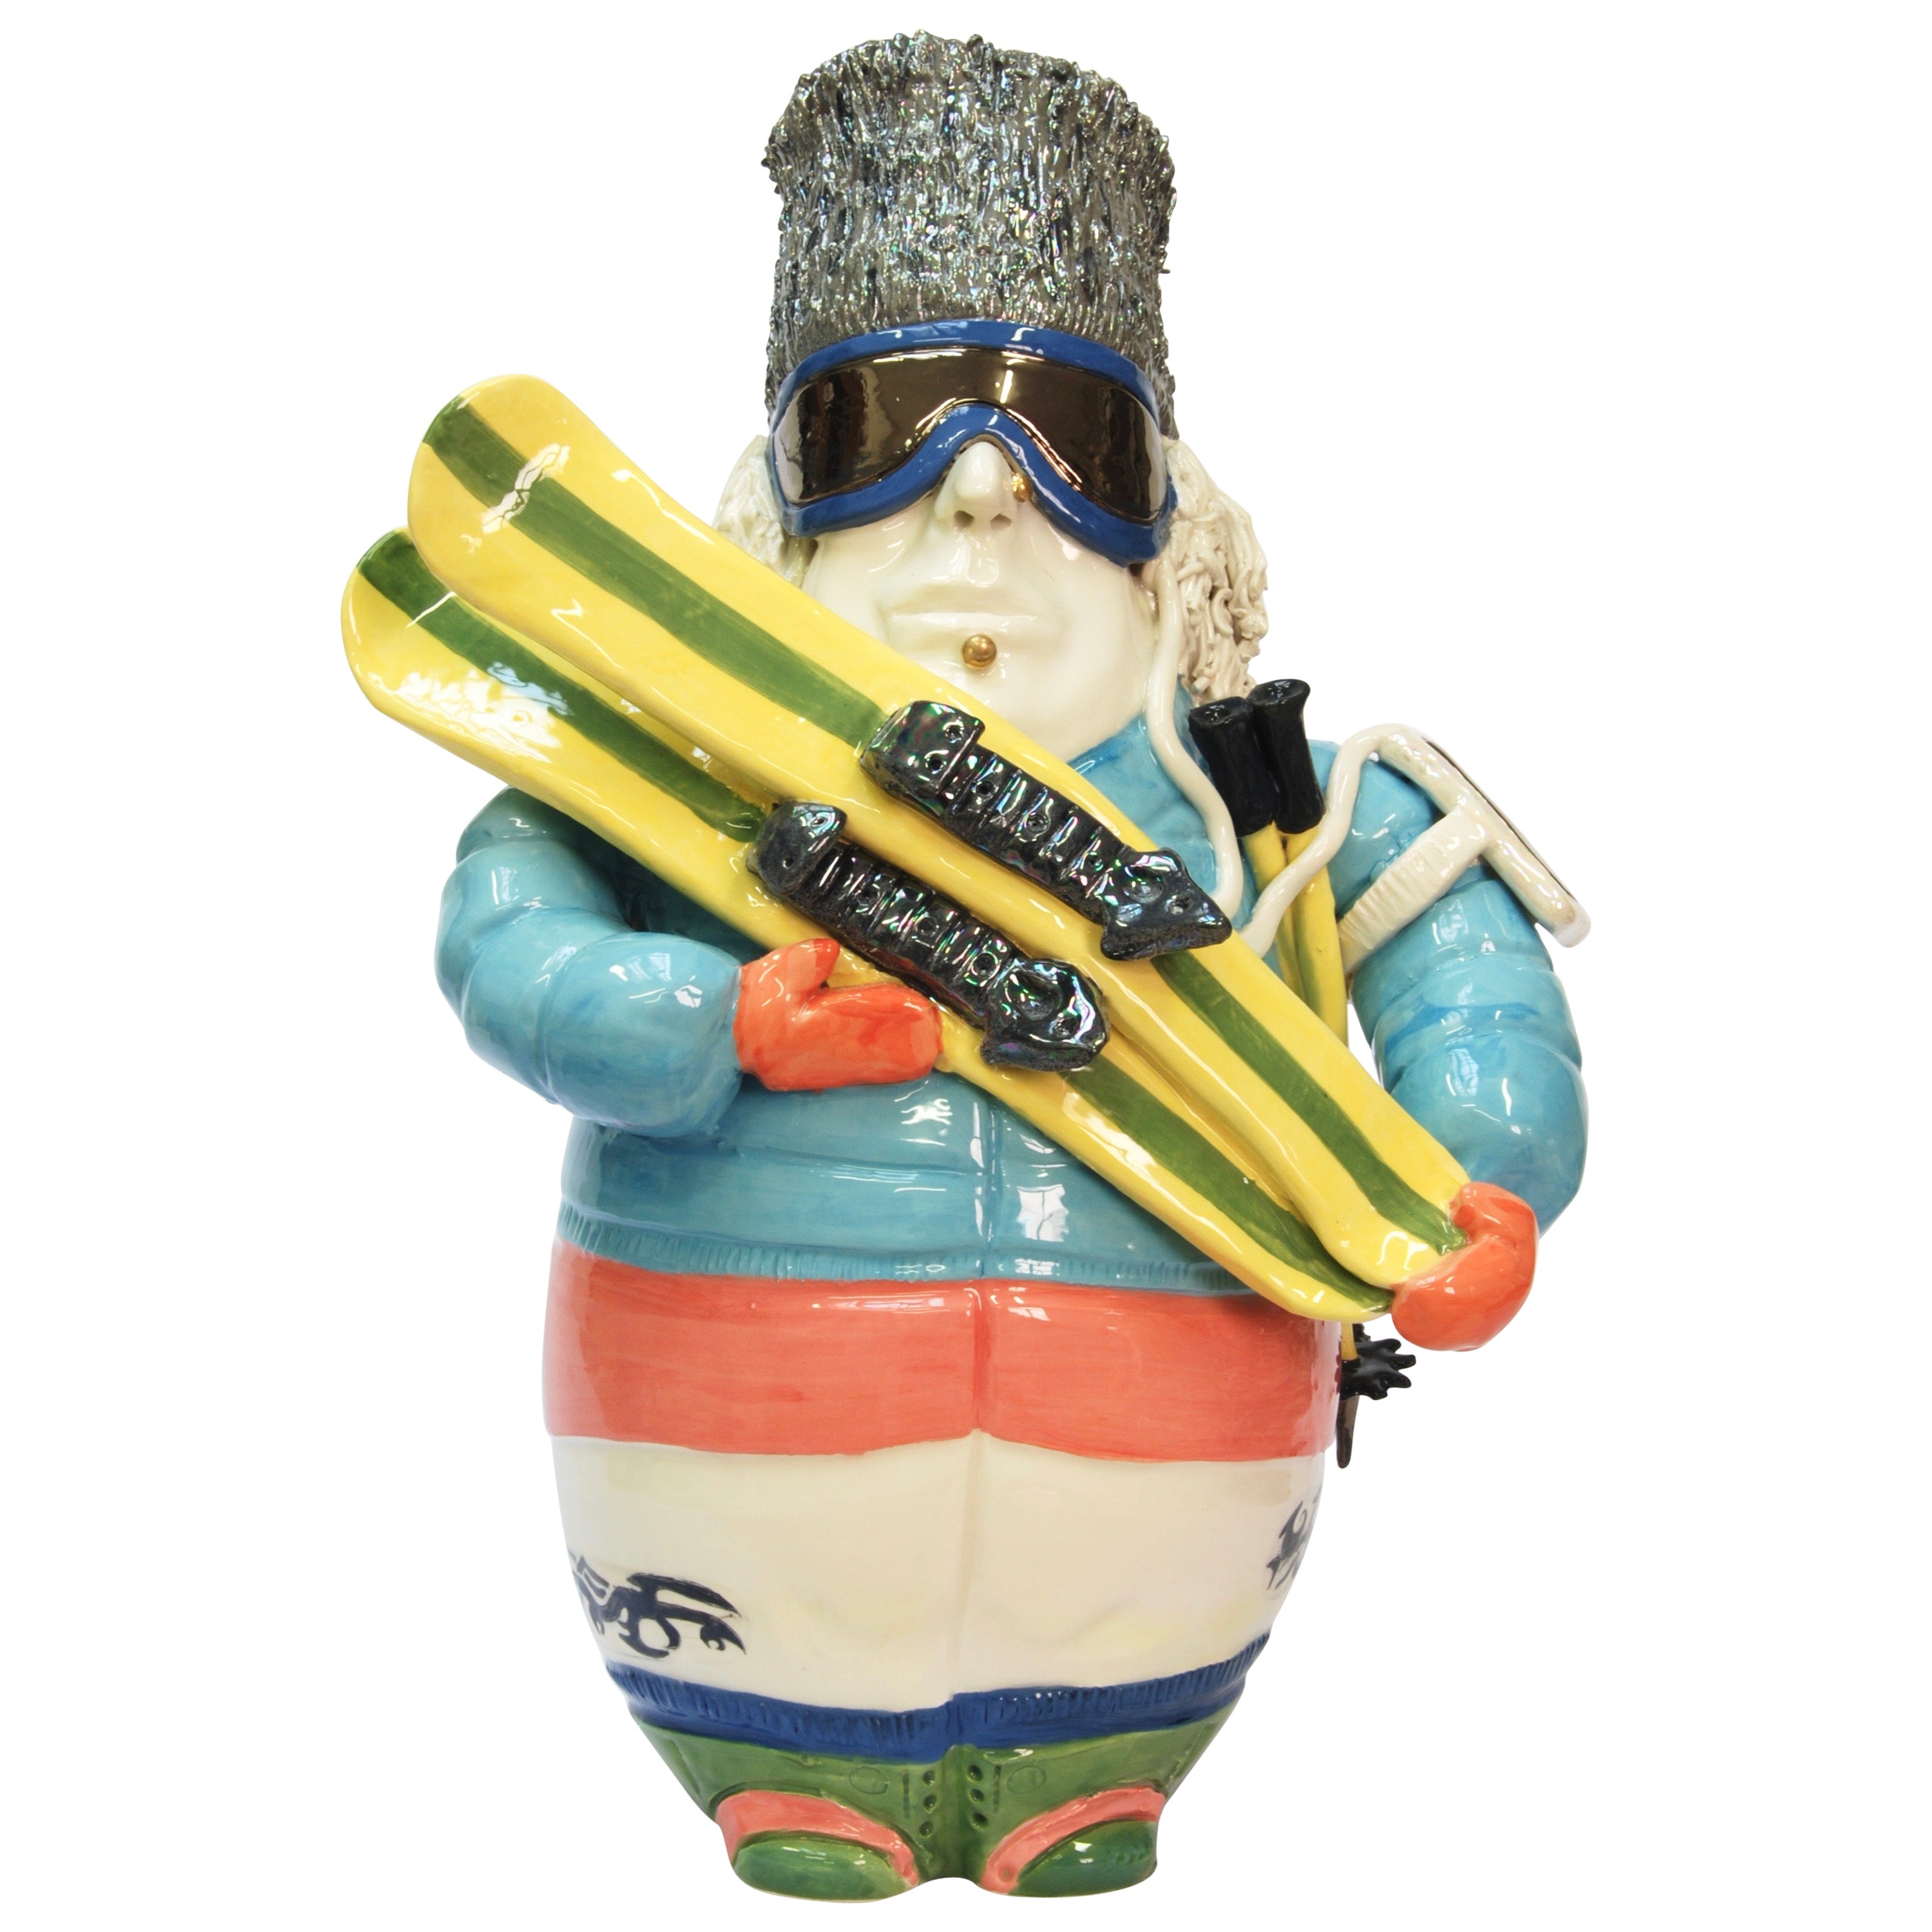 Skiing Man, Design Decorative Centerpiece Handmade Italy 2020, Hand-Crafted For Sale